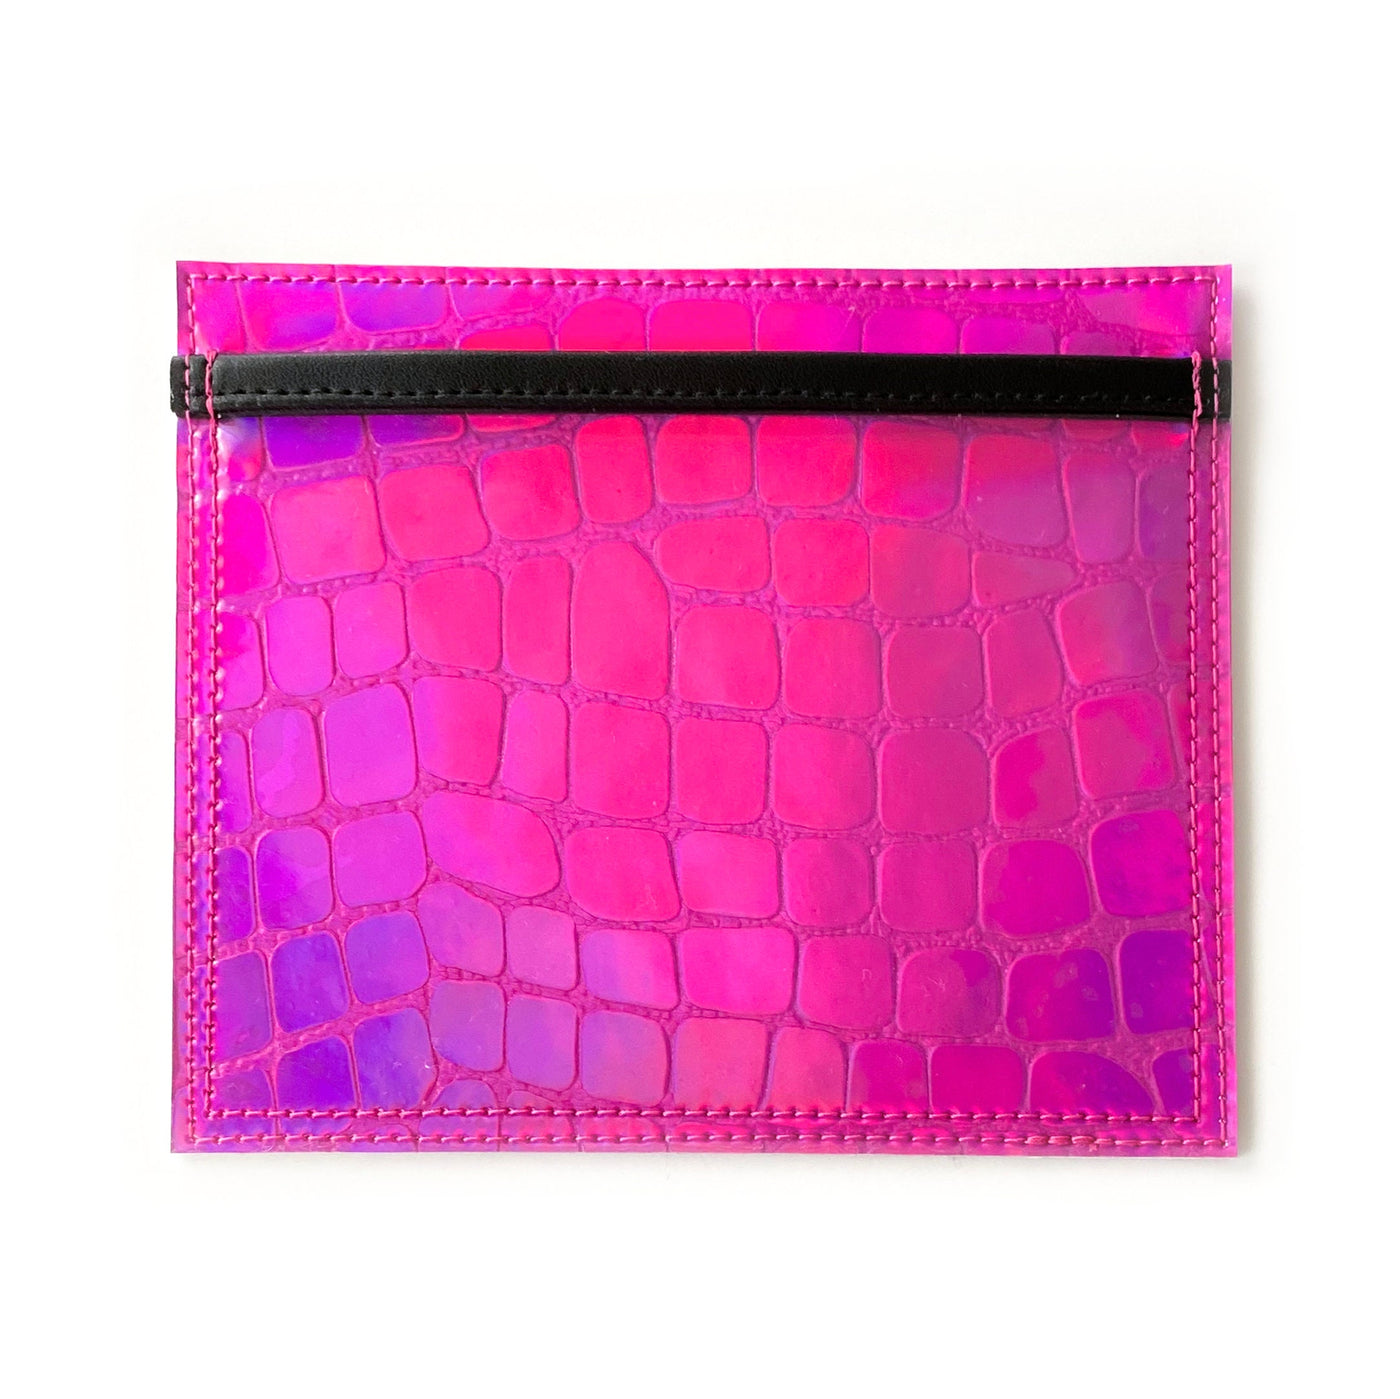 Vaccine Card Holder | hot pink holographic croc